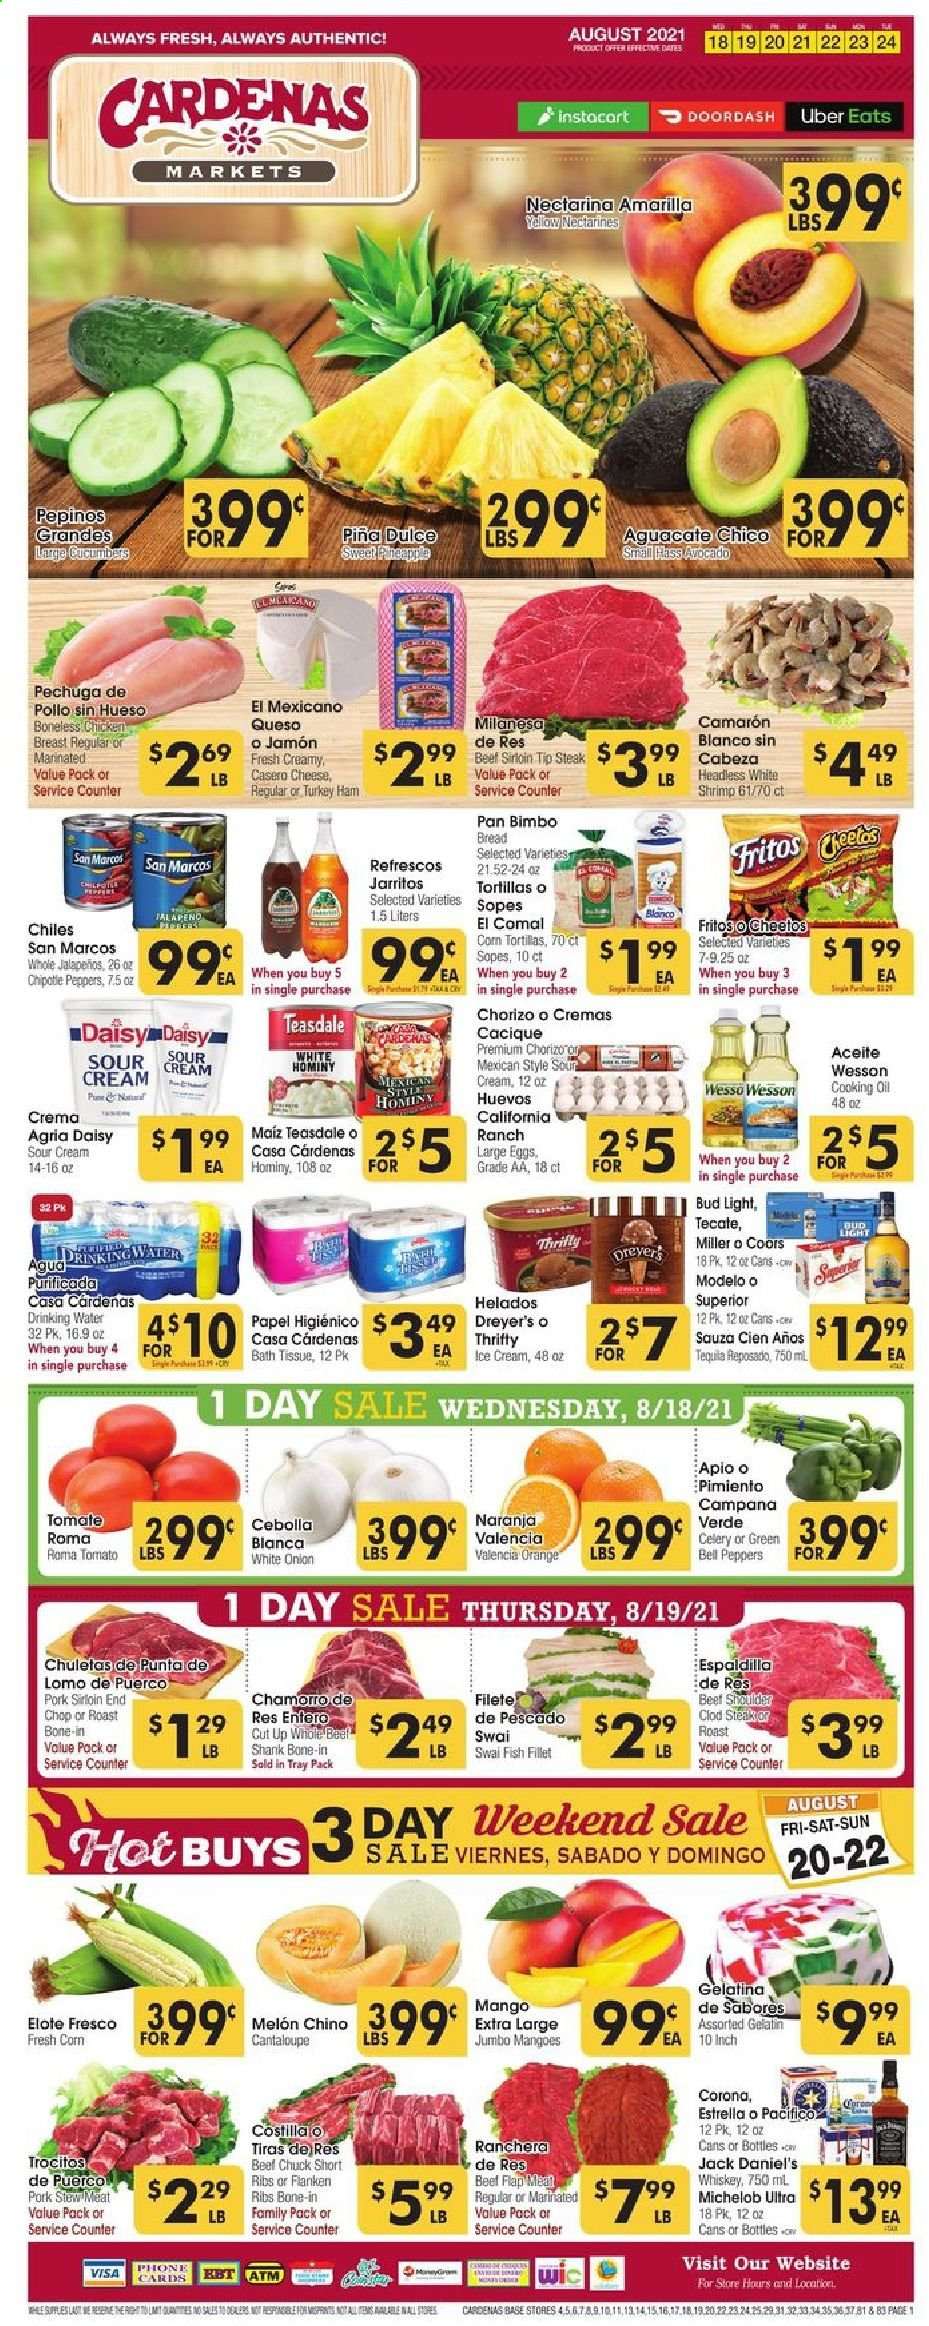 thumbnail - Cardenas Flyer - 08/18/2021 - 08/24/2021 - Sales products - stew meat, bread, tortillas, cantaloupe, cucumber, jalapeño, mango, oranges, fish fillets, fish, shrimps, swai fillet, Jack Daniel's, ham, chorizo, cheese, large eggs, Rama, sour cream, ice cream, Fritos, Cheetos, oil, tequila, whiskey, whisky, beer, Coors, Michelob, Bud Light, Corona Extra, Miller, Modelo, chicken breasts, beef meat, beef shank, beef sirloin, steak, pork loin, bath tissue, pan, gelatin, nectarines, melons. Page 1.